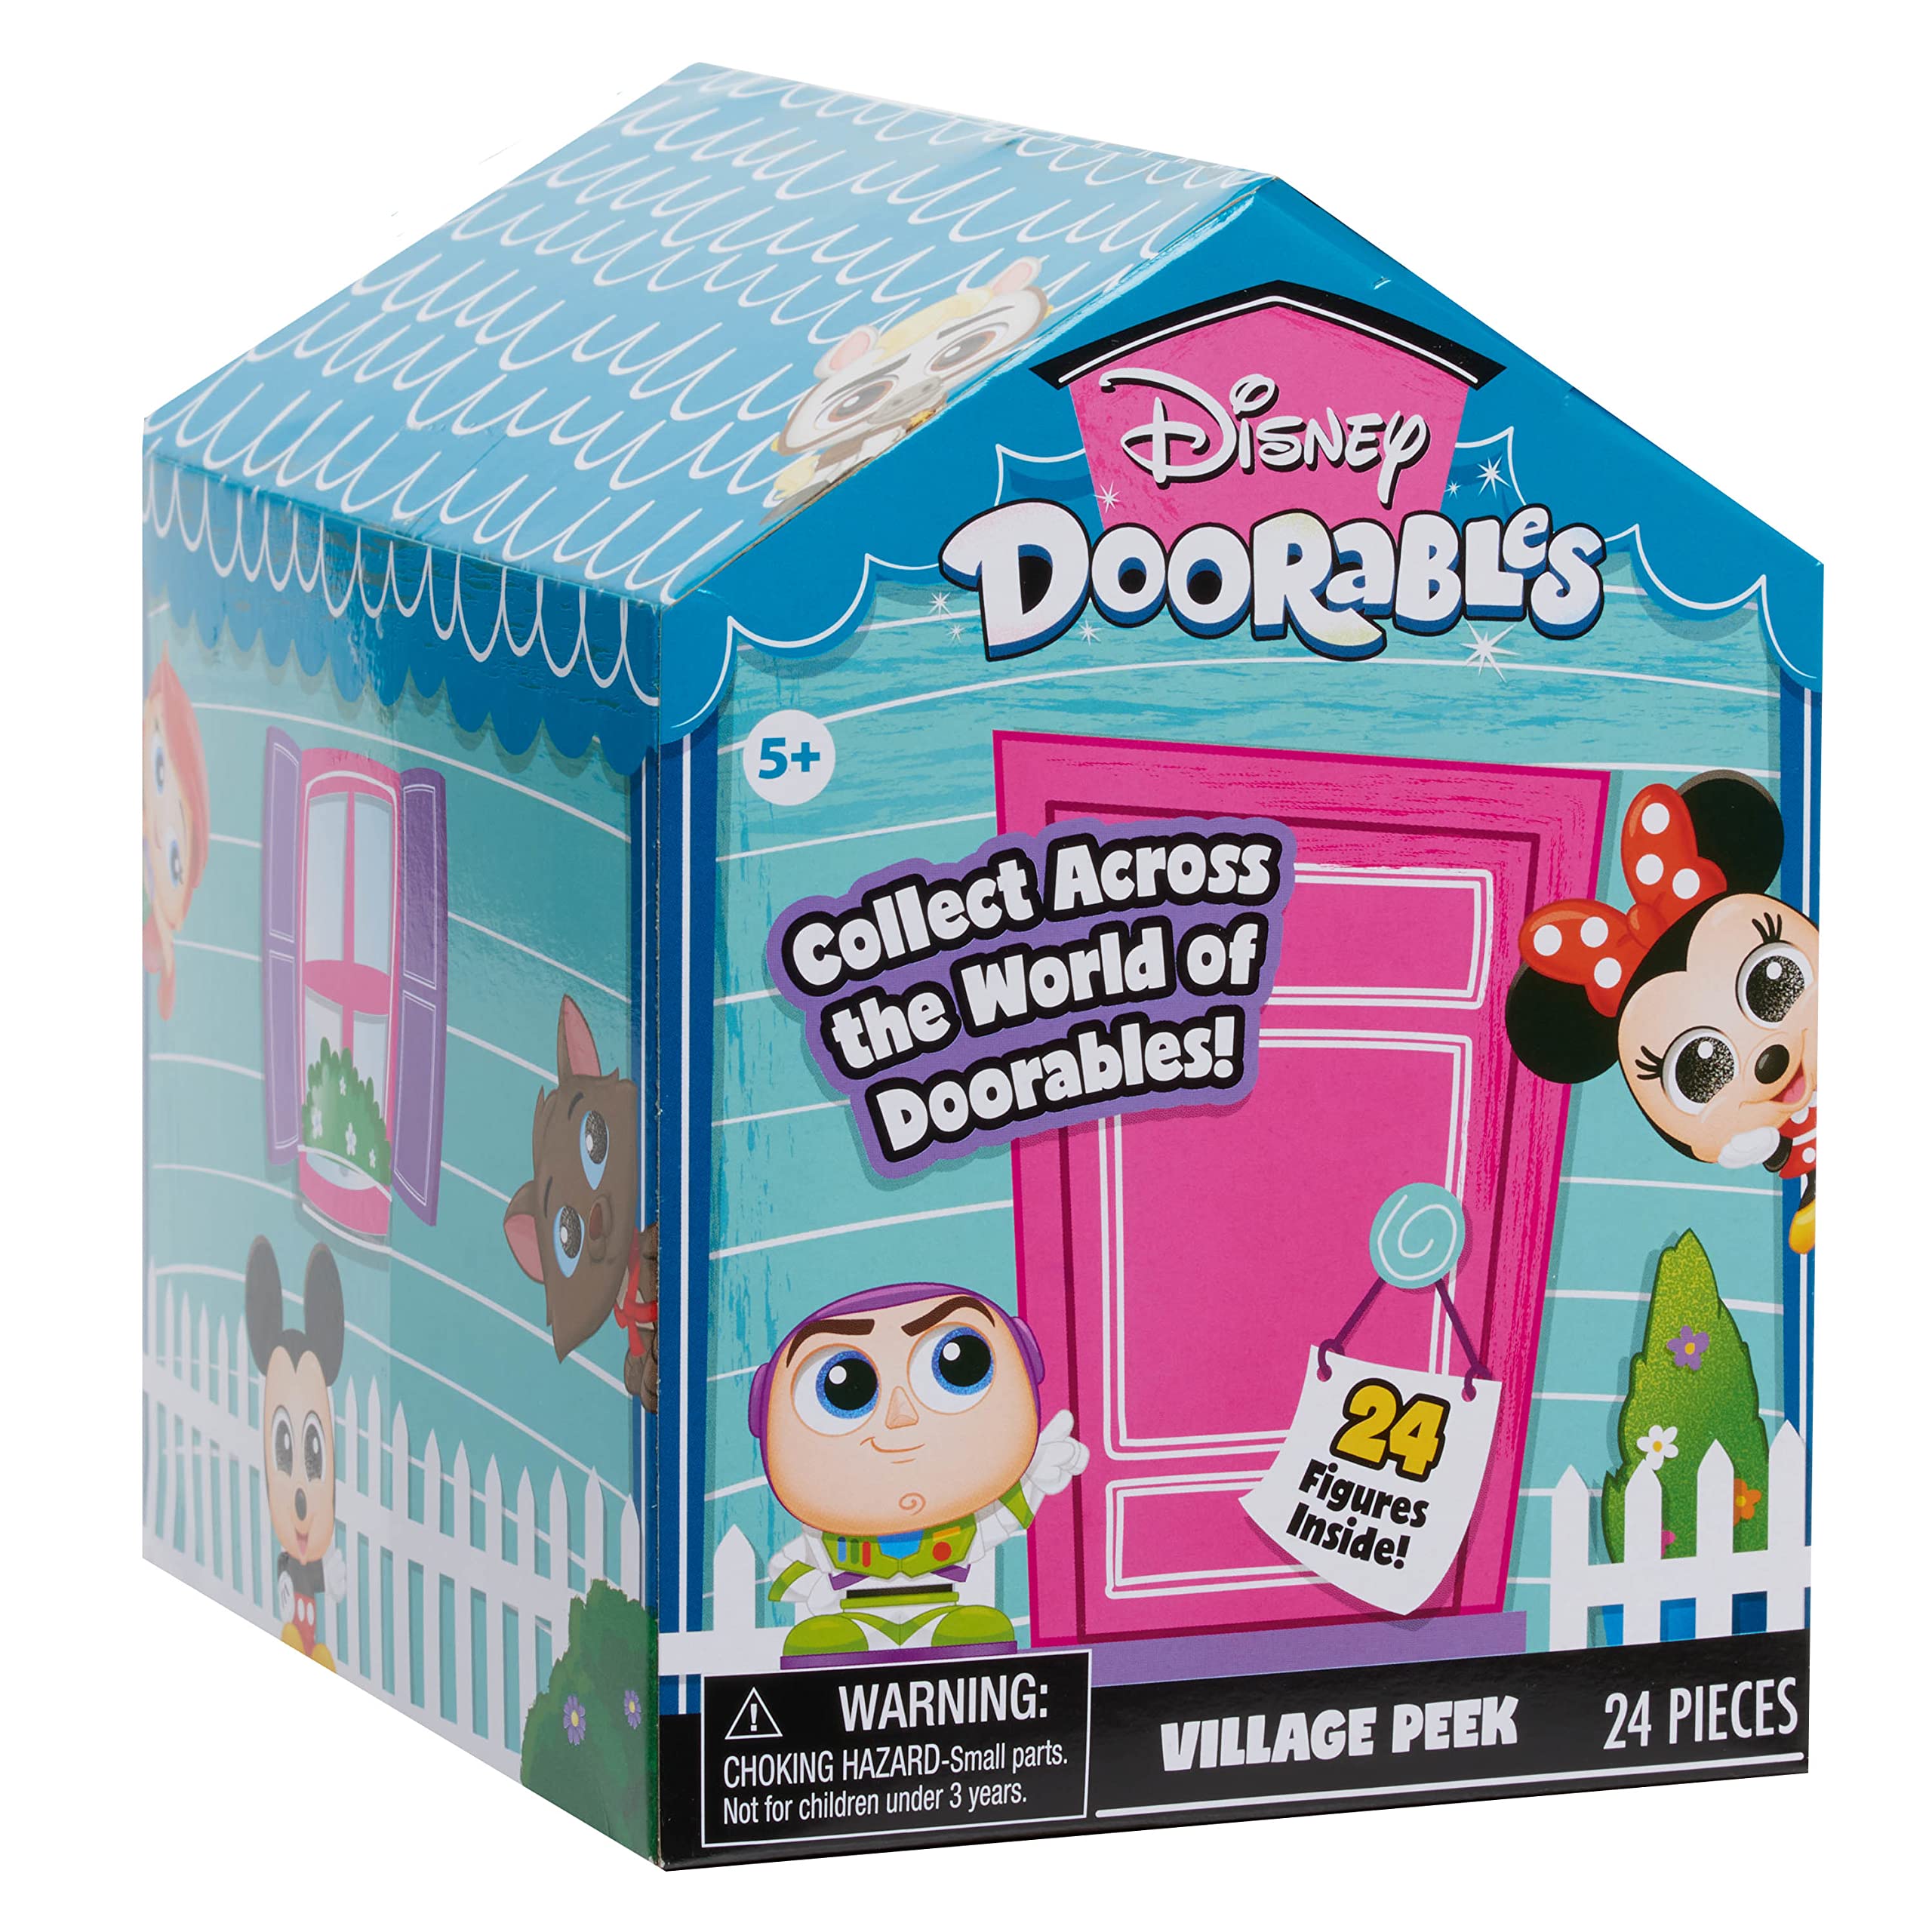 Disney Doorables Village Peek Pack, Series 5 and 6, Includes 24 Figures, Styles May Vary, Amazon Exclusive, by Just Play